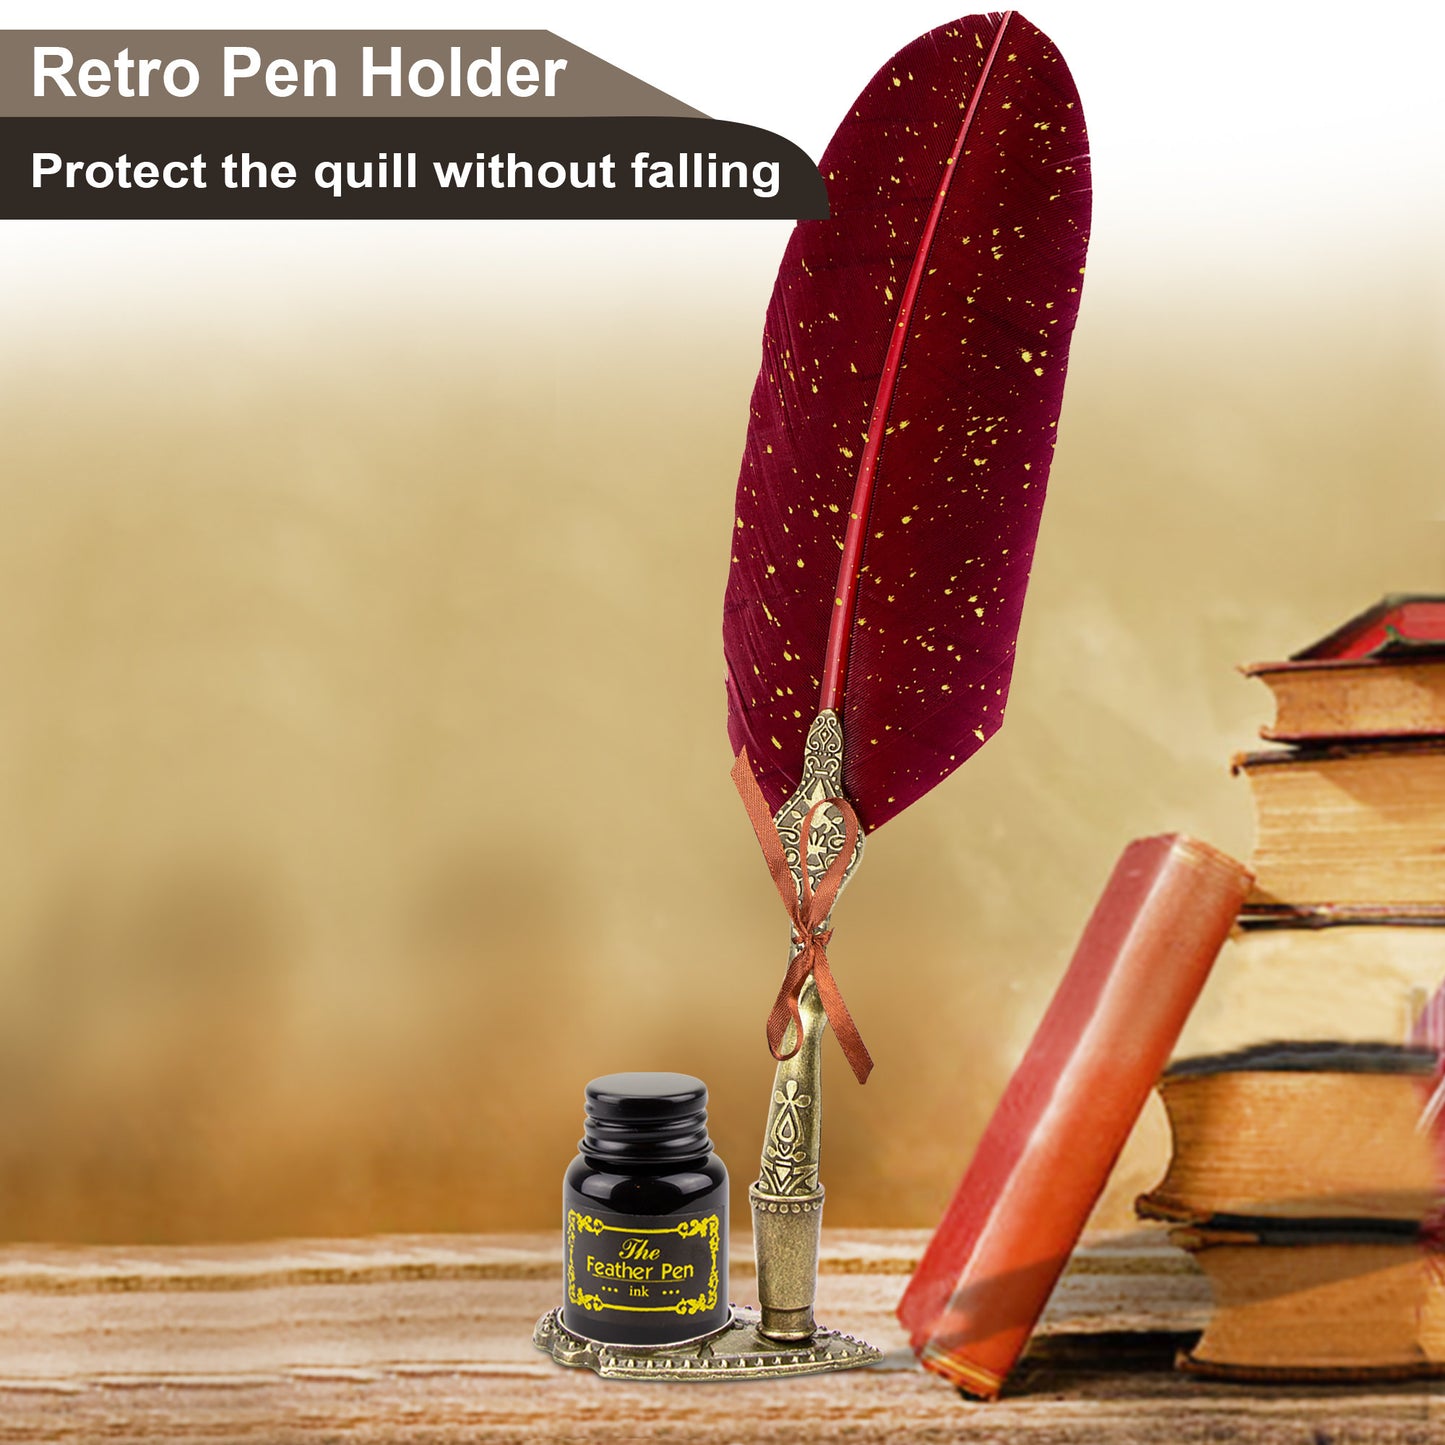 Trustela's Quill Pen And Ink Set - Includes Feather Pen Antique, Dip Pen Stand, Calligraphy Nibs And Black Ink Well In A Gift Box